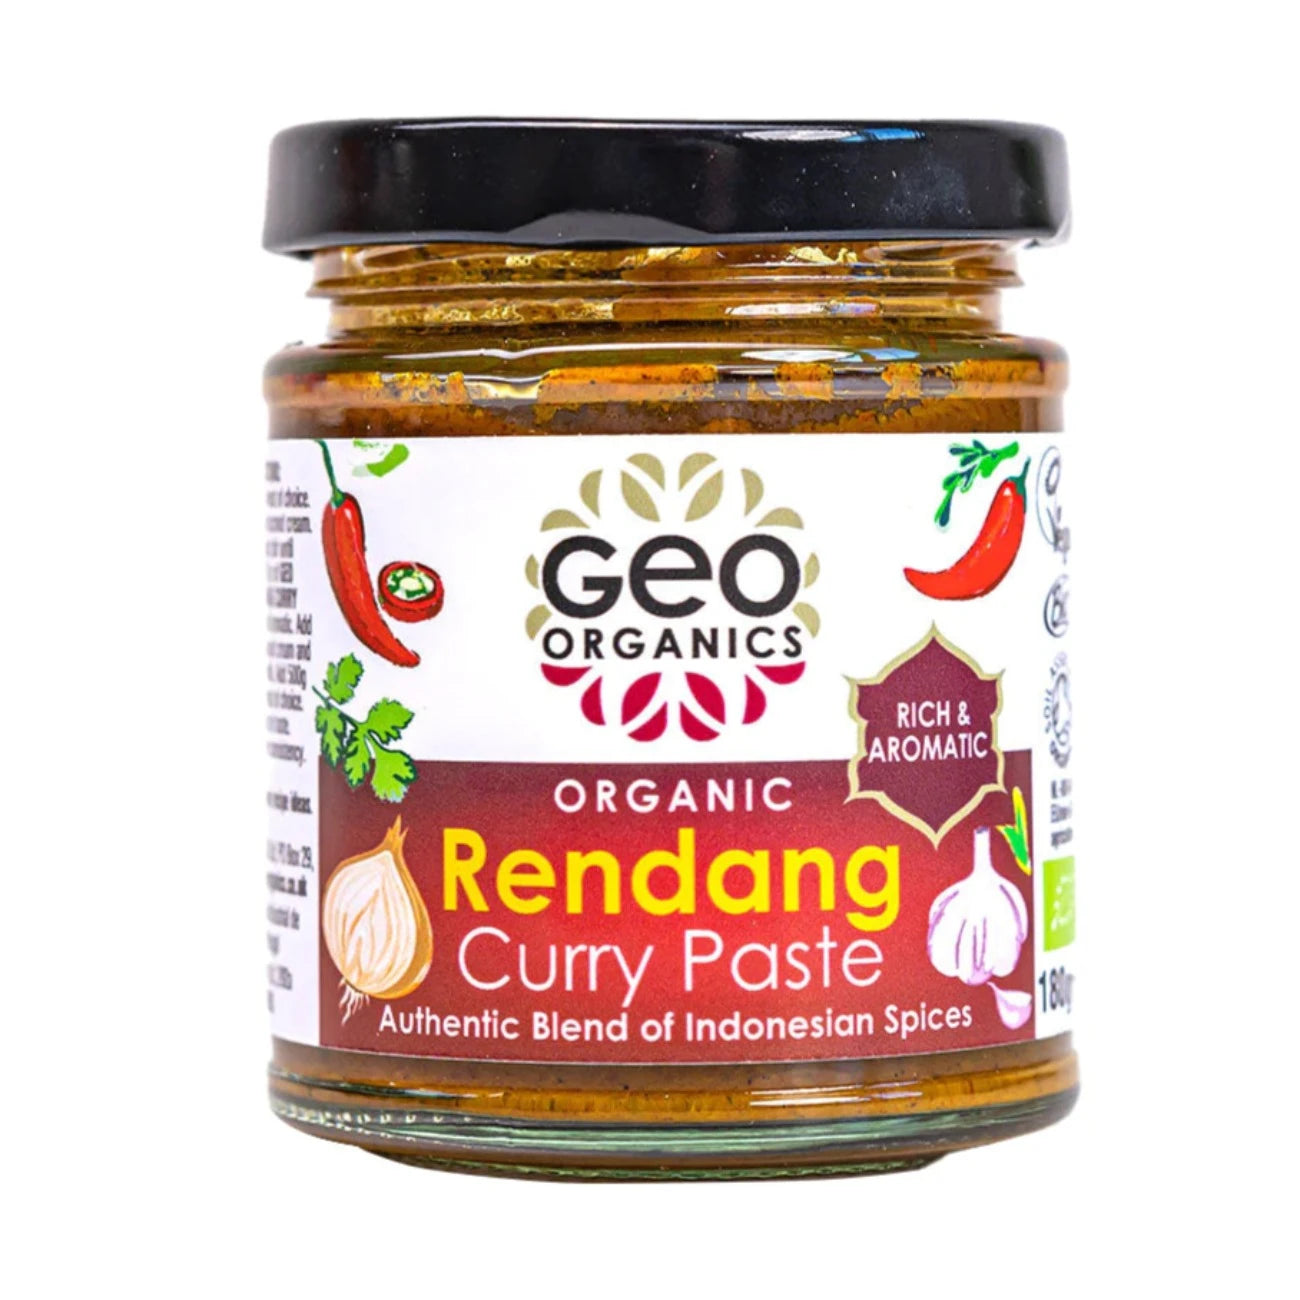 Rendang Indonesian Curry Pastes 180g